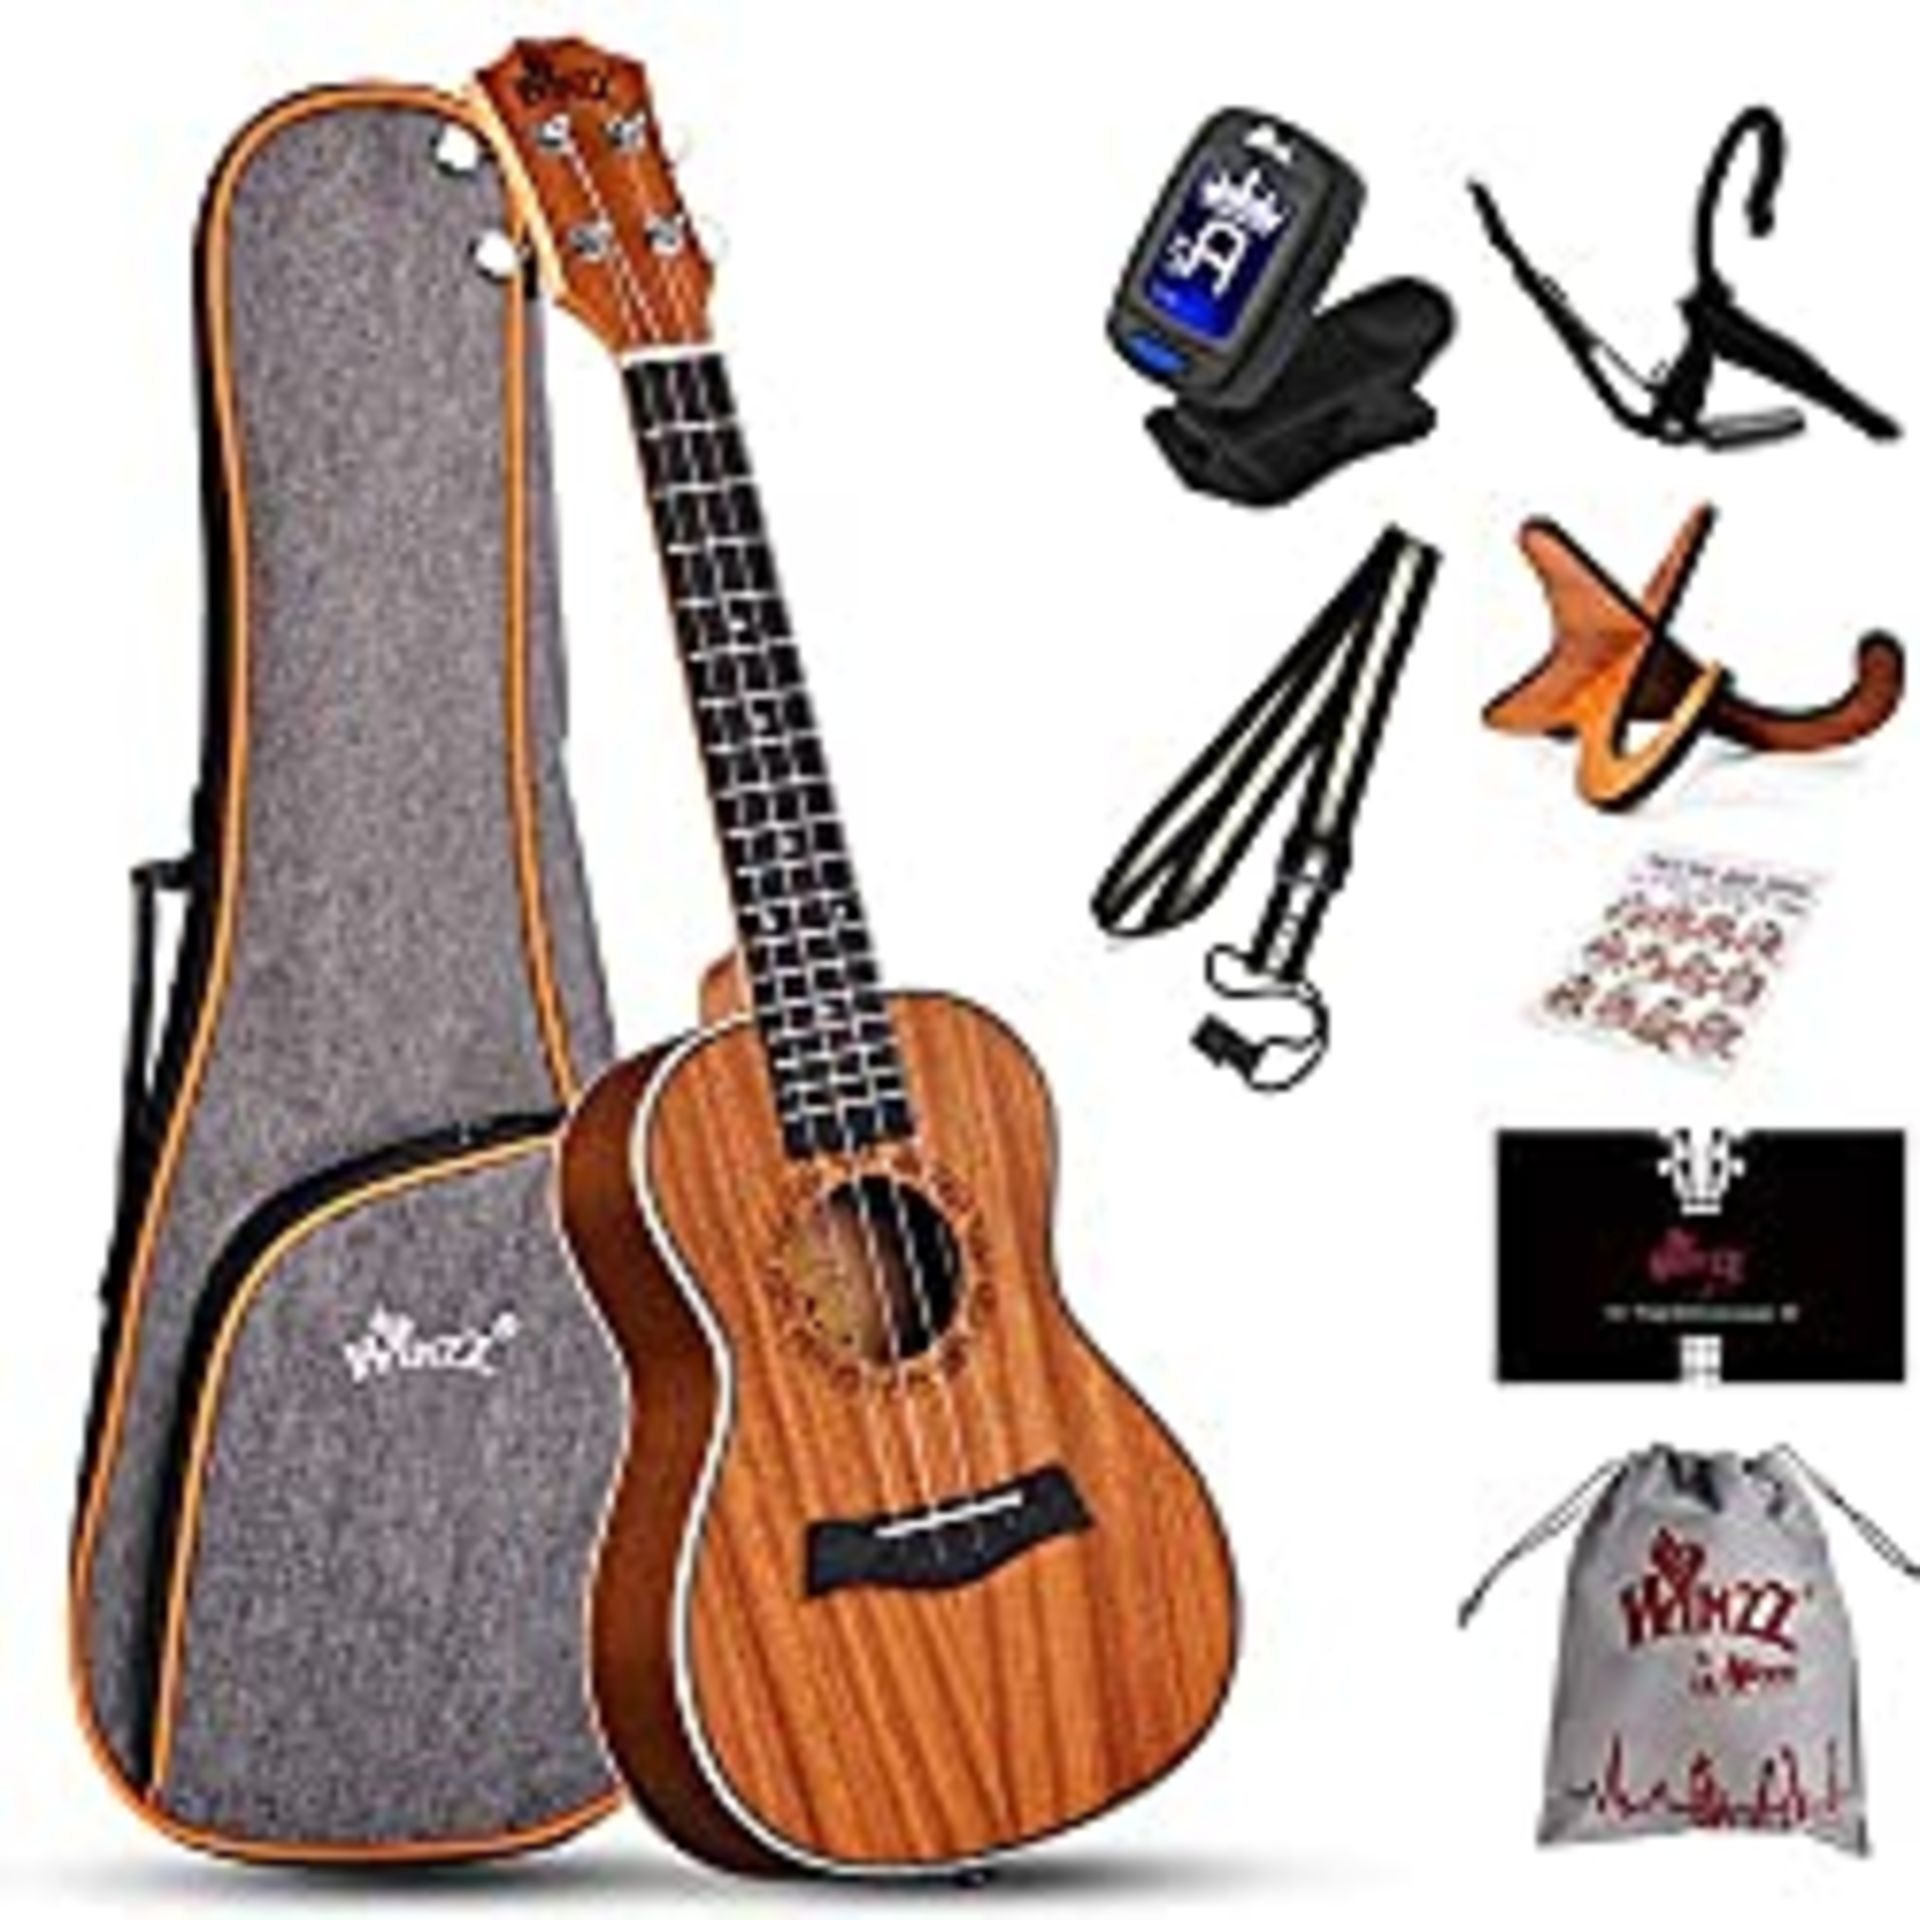 RRP £52.45 Winzz Concert Ukulele 23 Inch for Adult